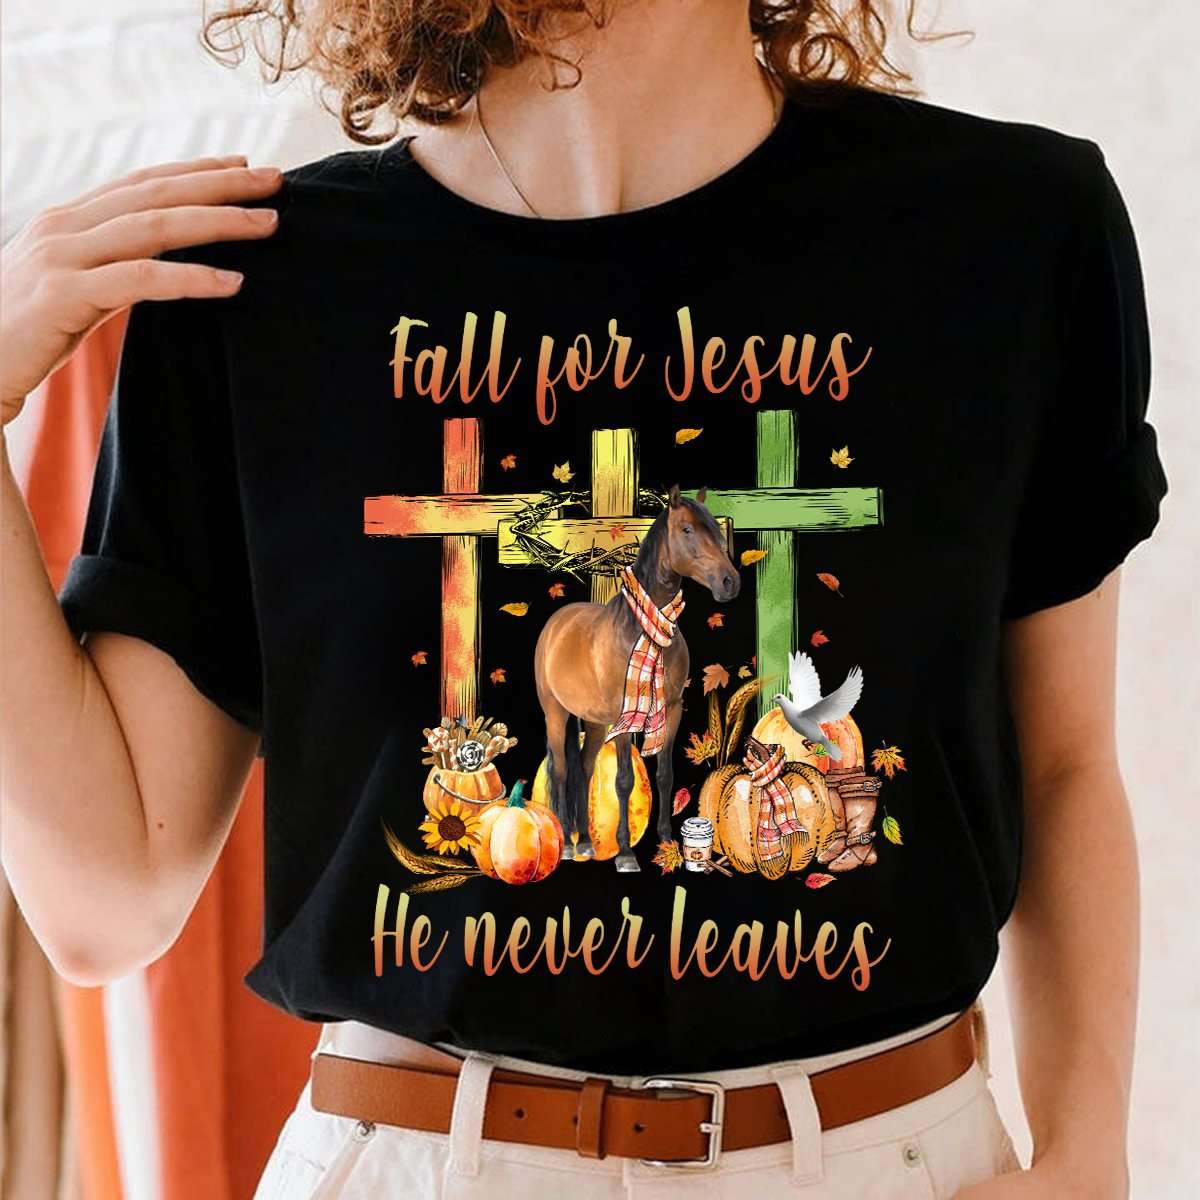 Fall for Jesus, he never leaves - Horse and pumpkin, Believe in Jesus